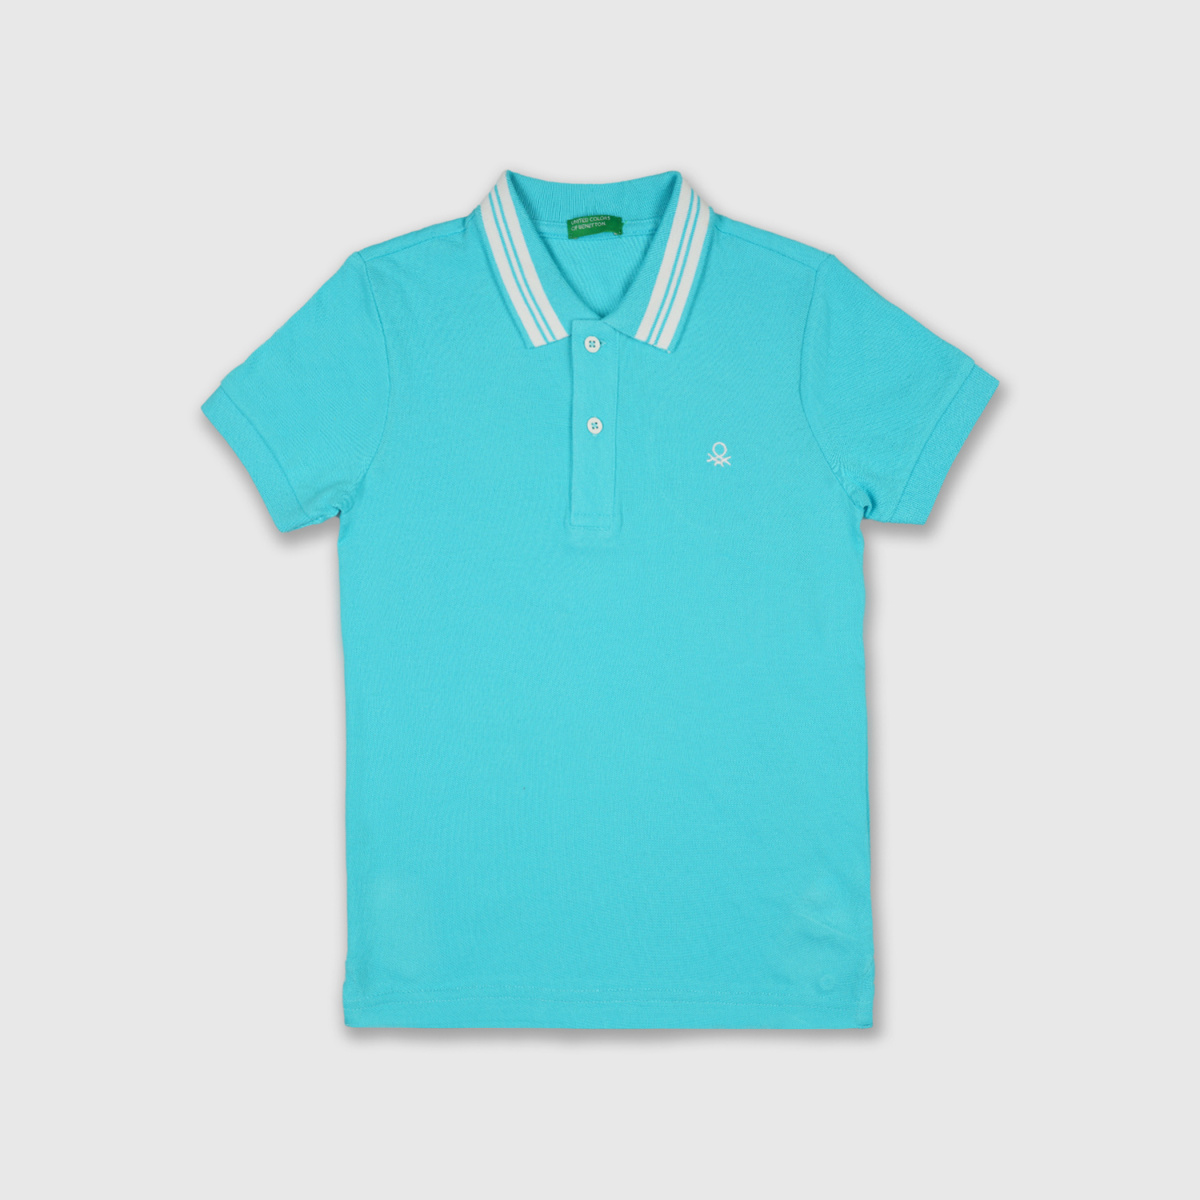 UNITED COLORS OF BENETTON Boys Solid Polo T-shirt